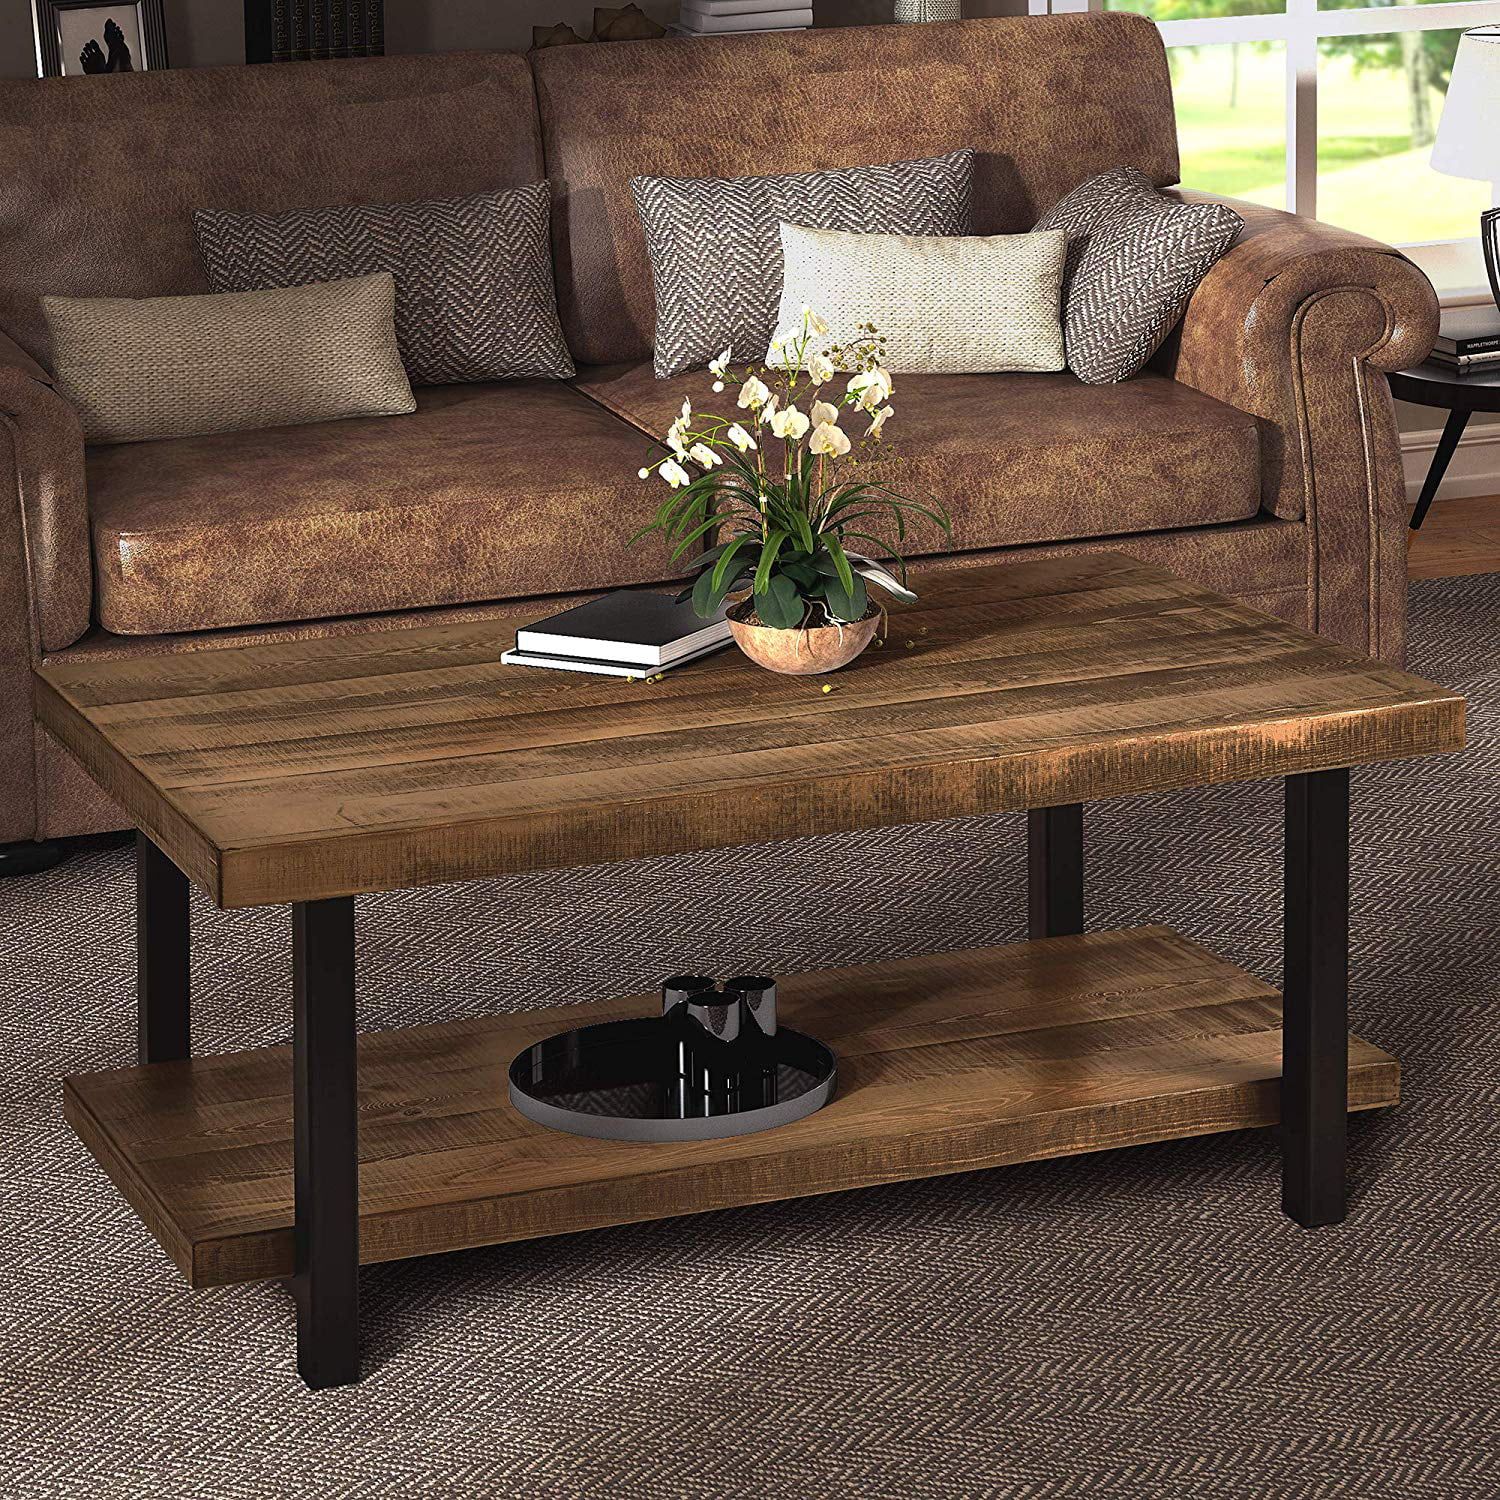 Harper&bright Designs Industrial Rectangular Pine Wood Coffee Table Throughout Rustic Coffee Tables (Photo 11 of 15)